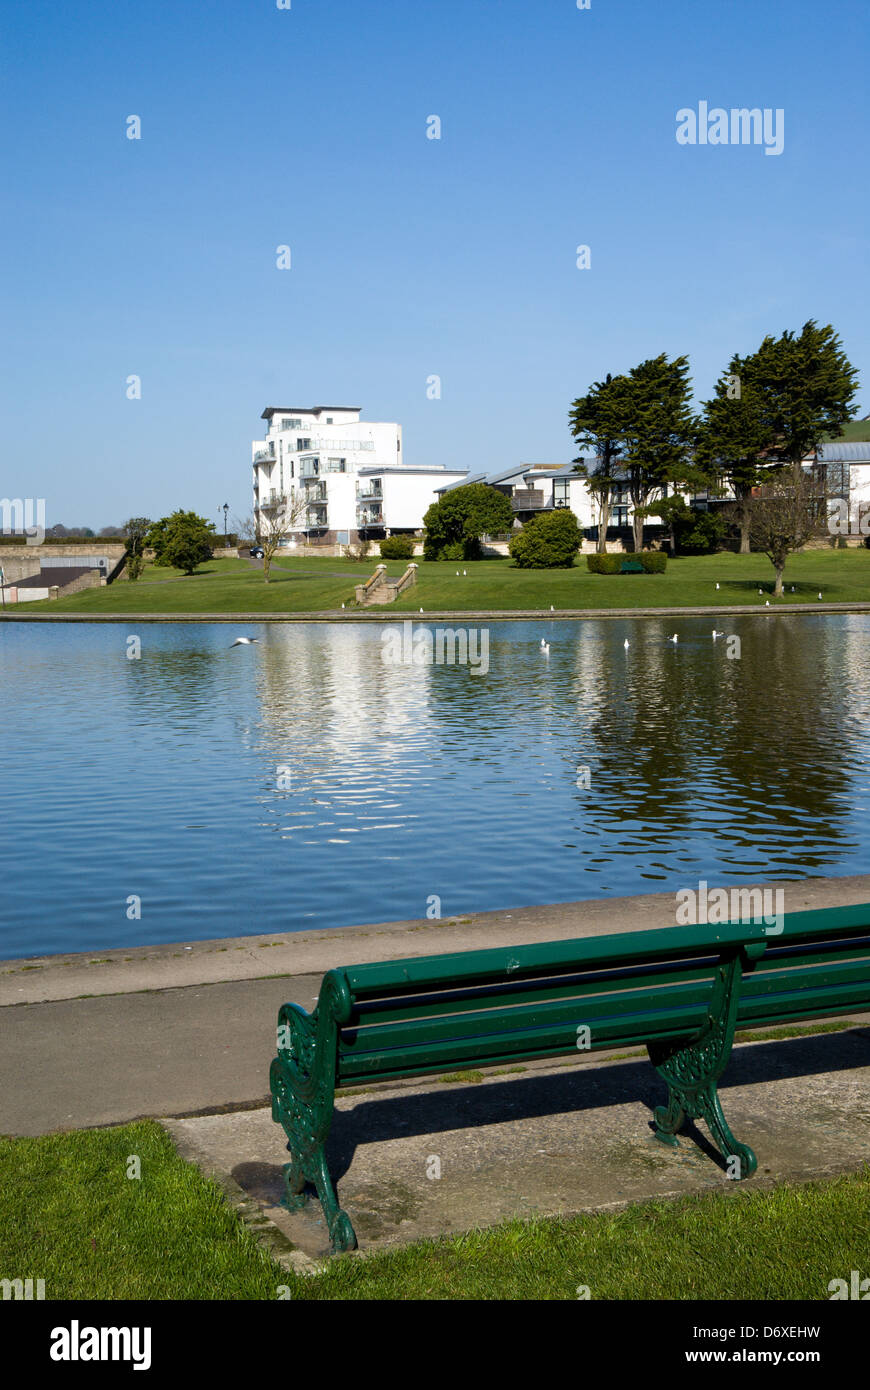 Lake and park, cold knap, barry, vale of glamorgan, south wales, uk Stock Photo